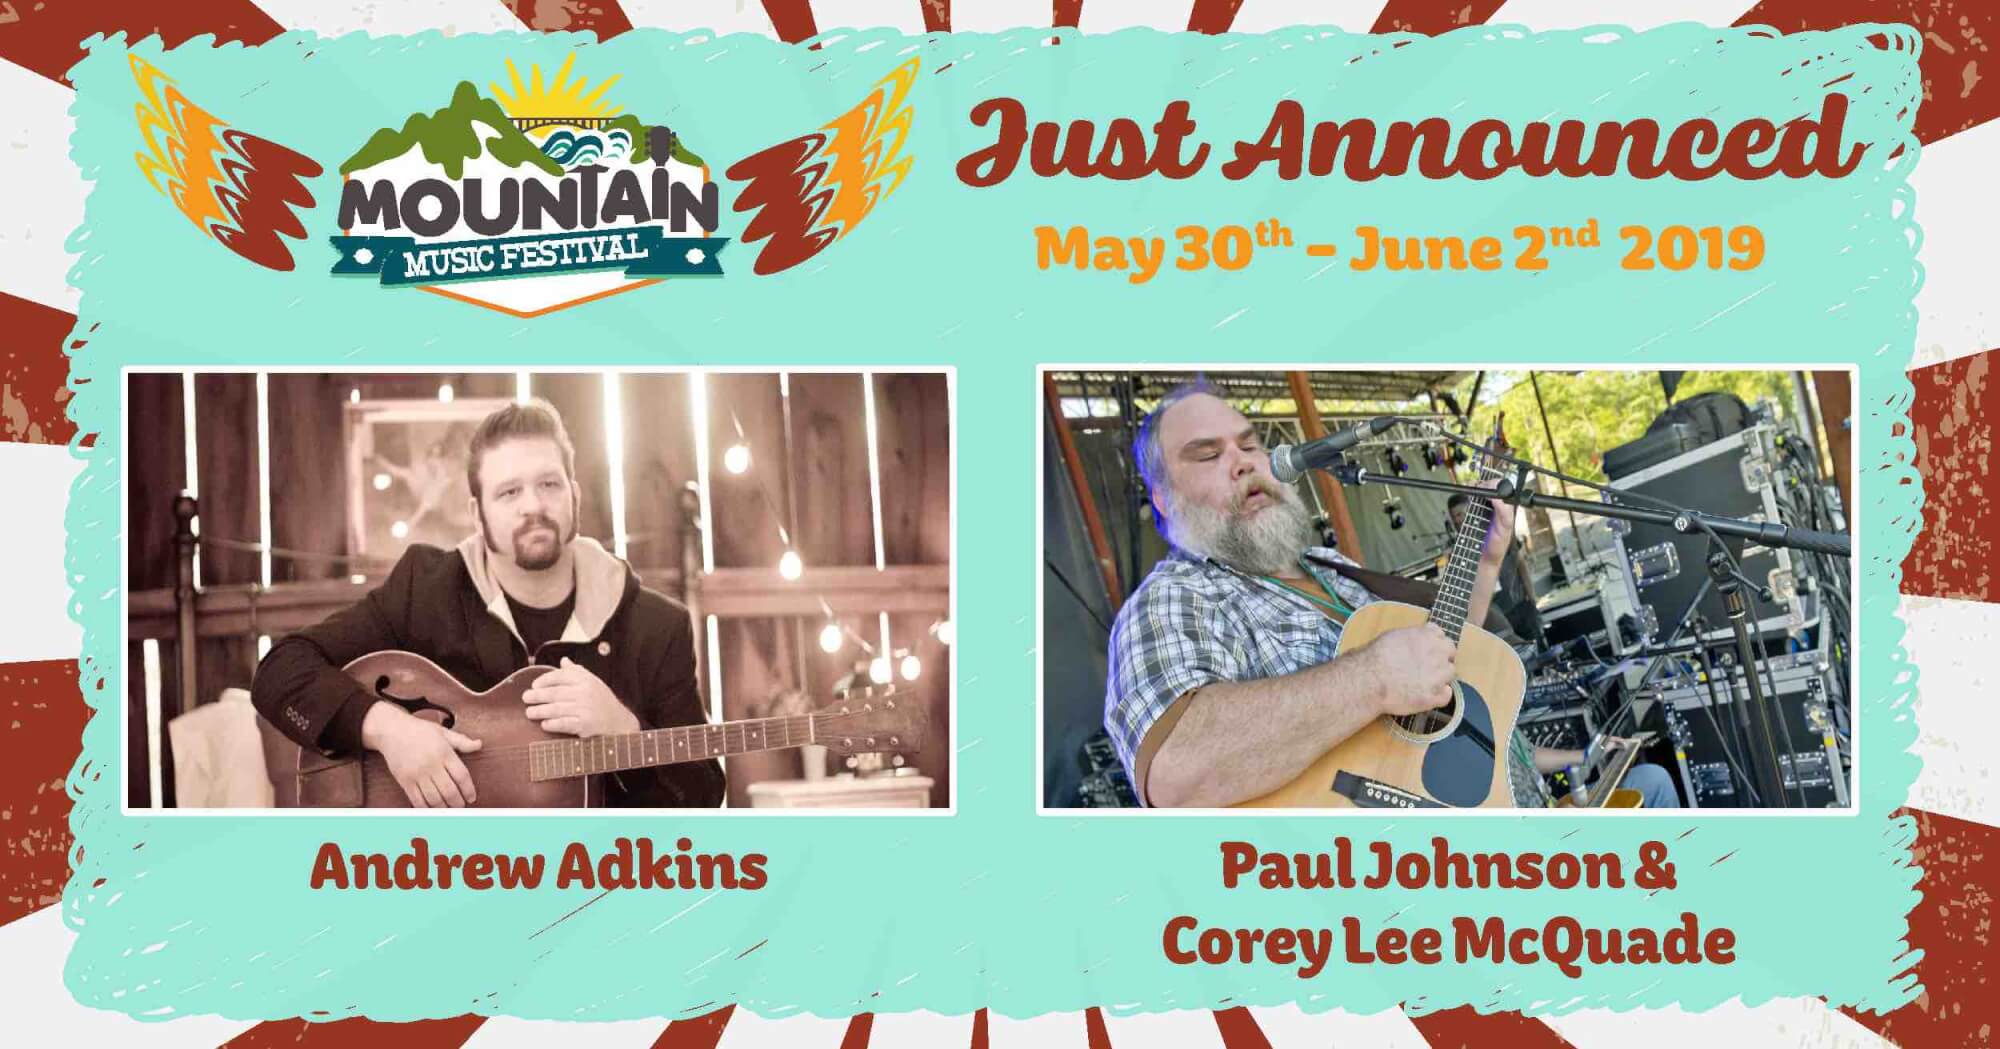 mountain music festival 2019 lineup announcement with andrew adkins and paul johnson